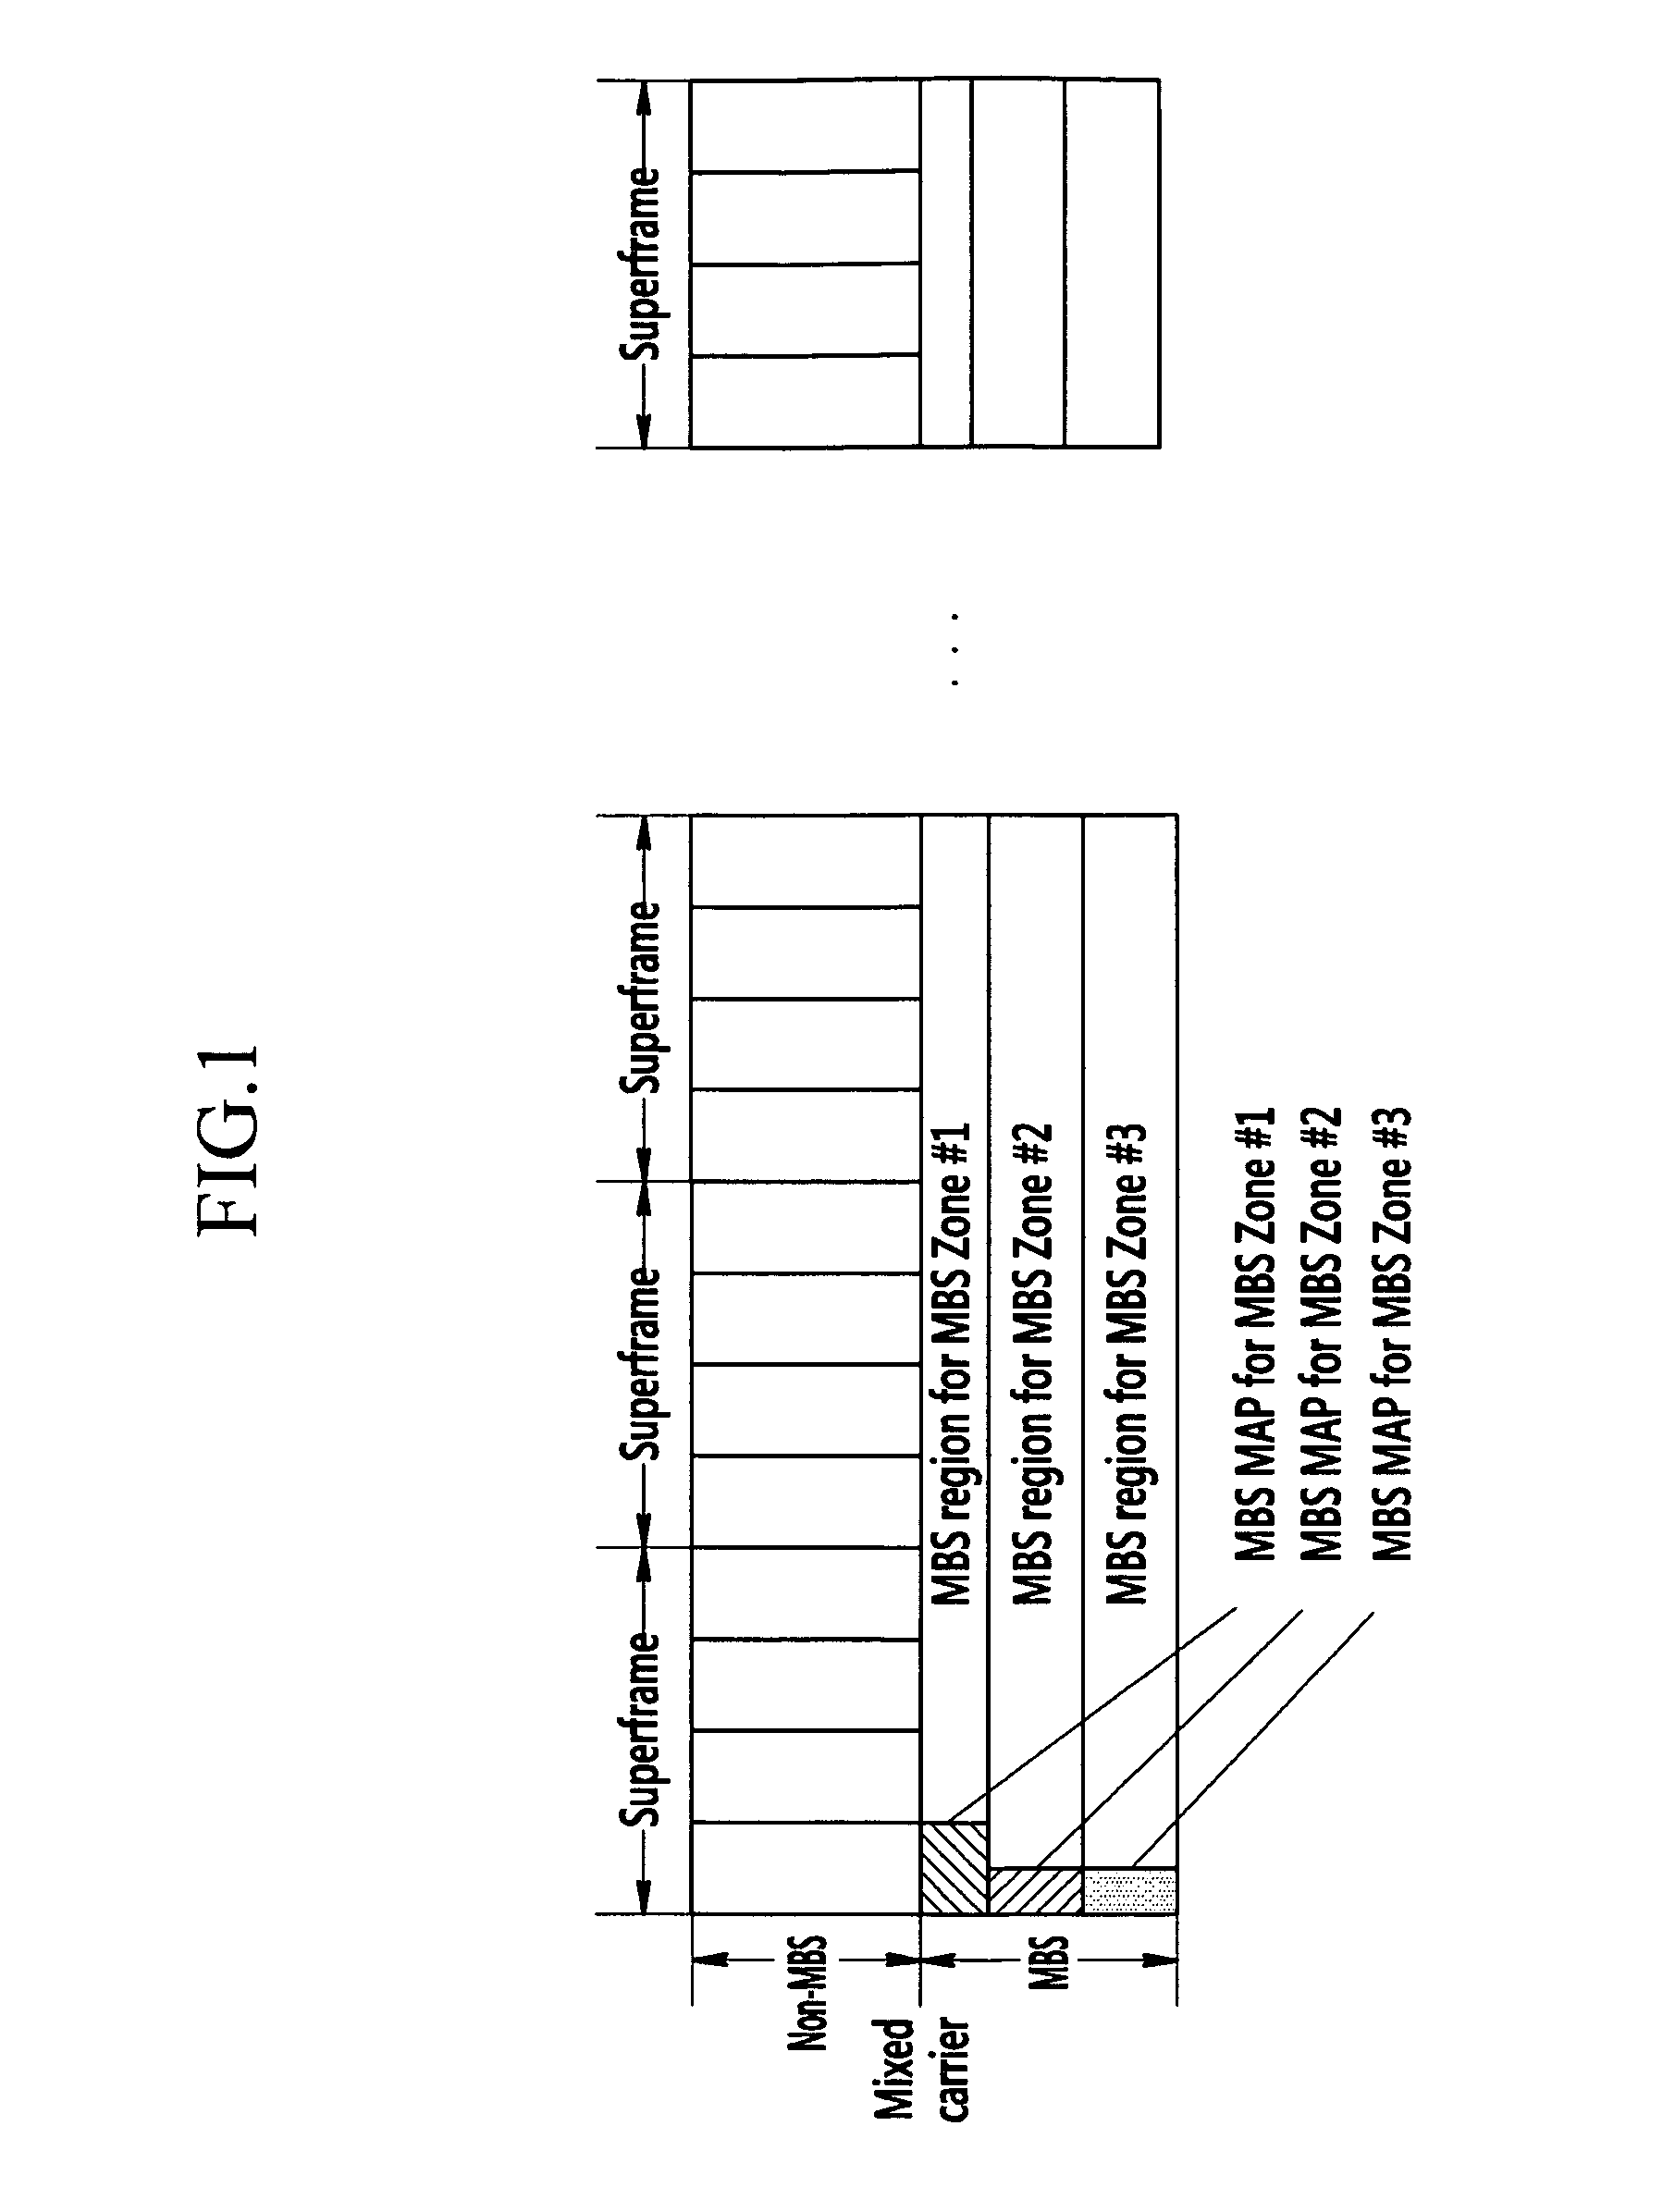 Apparatus and method for transmitting and receiving mbs data